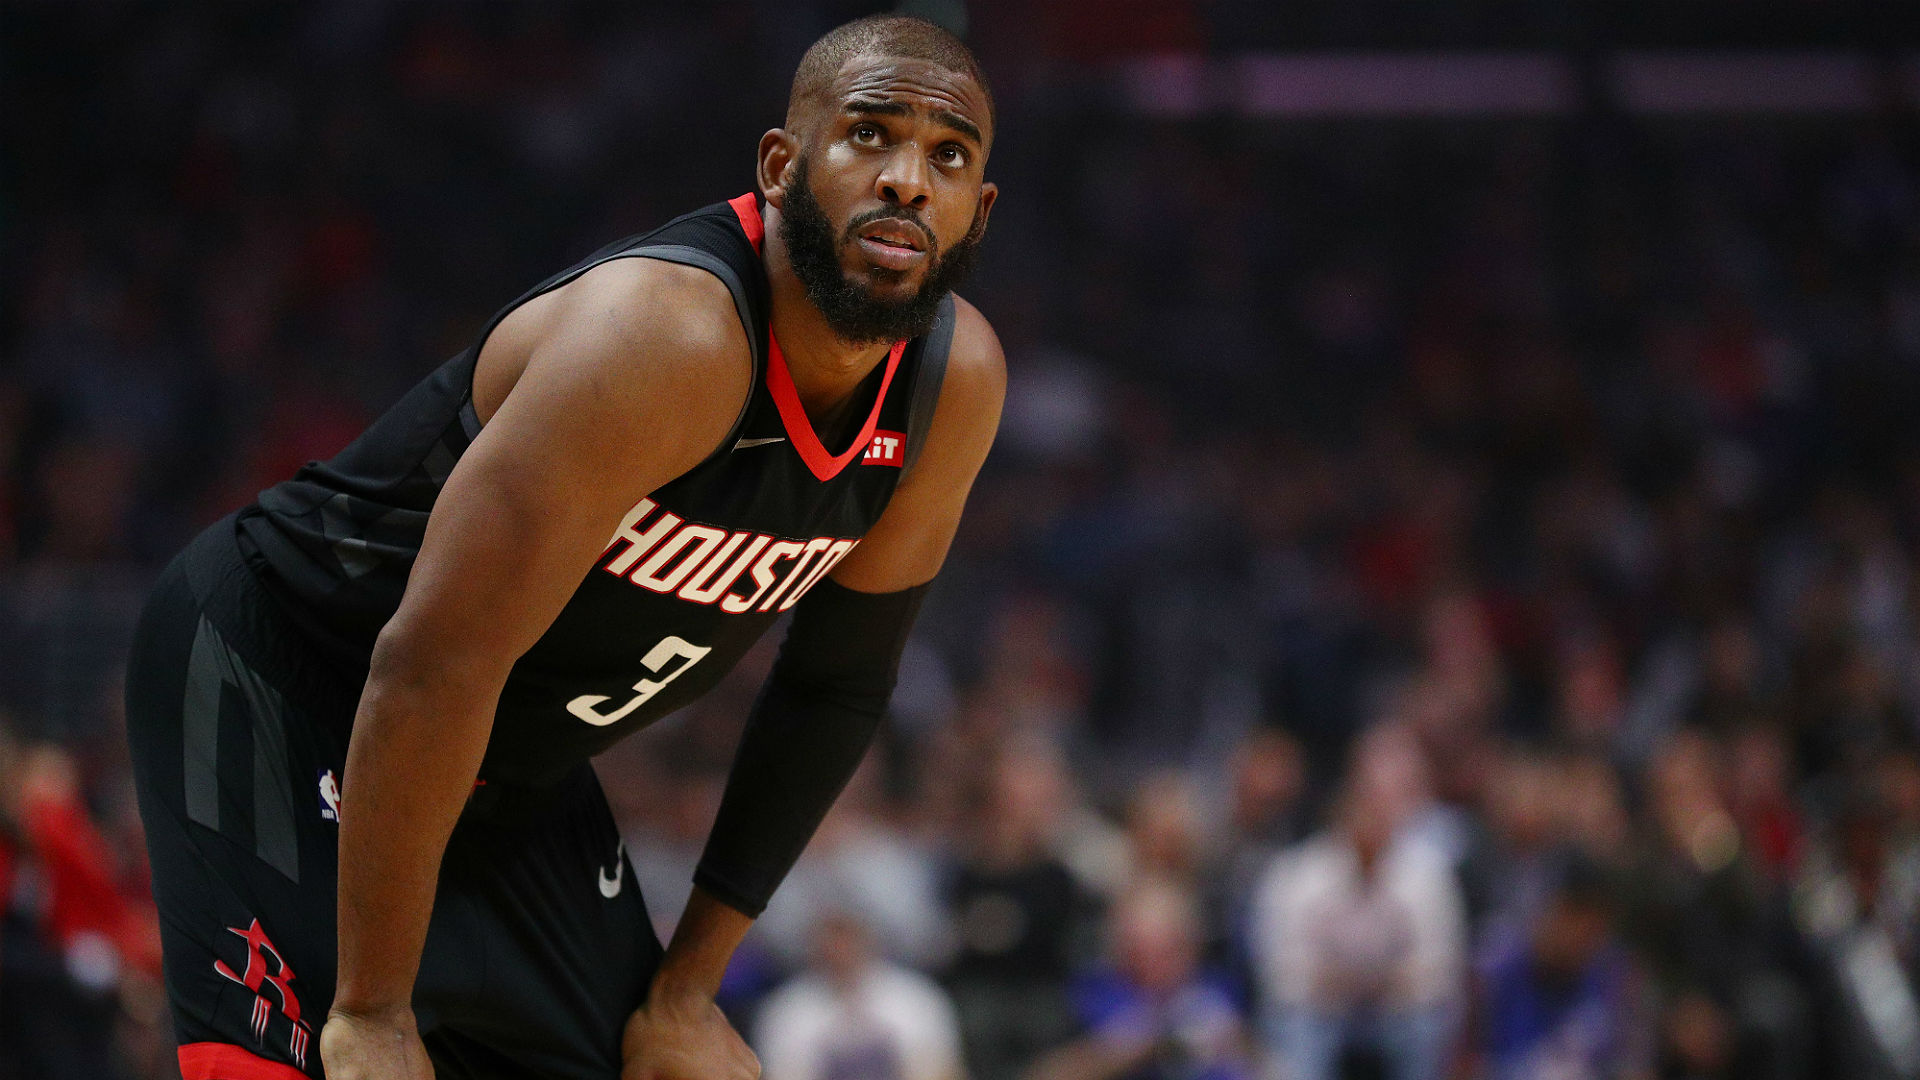 Houston Rockets guard Chris Paul wants to stay with the NBA team heading into 2019-20.